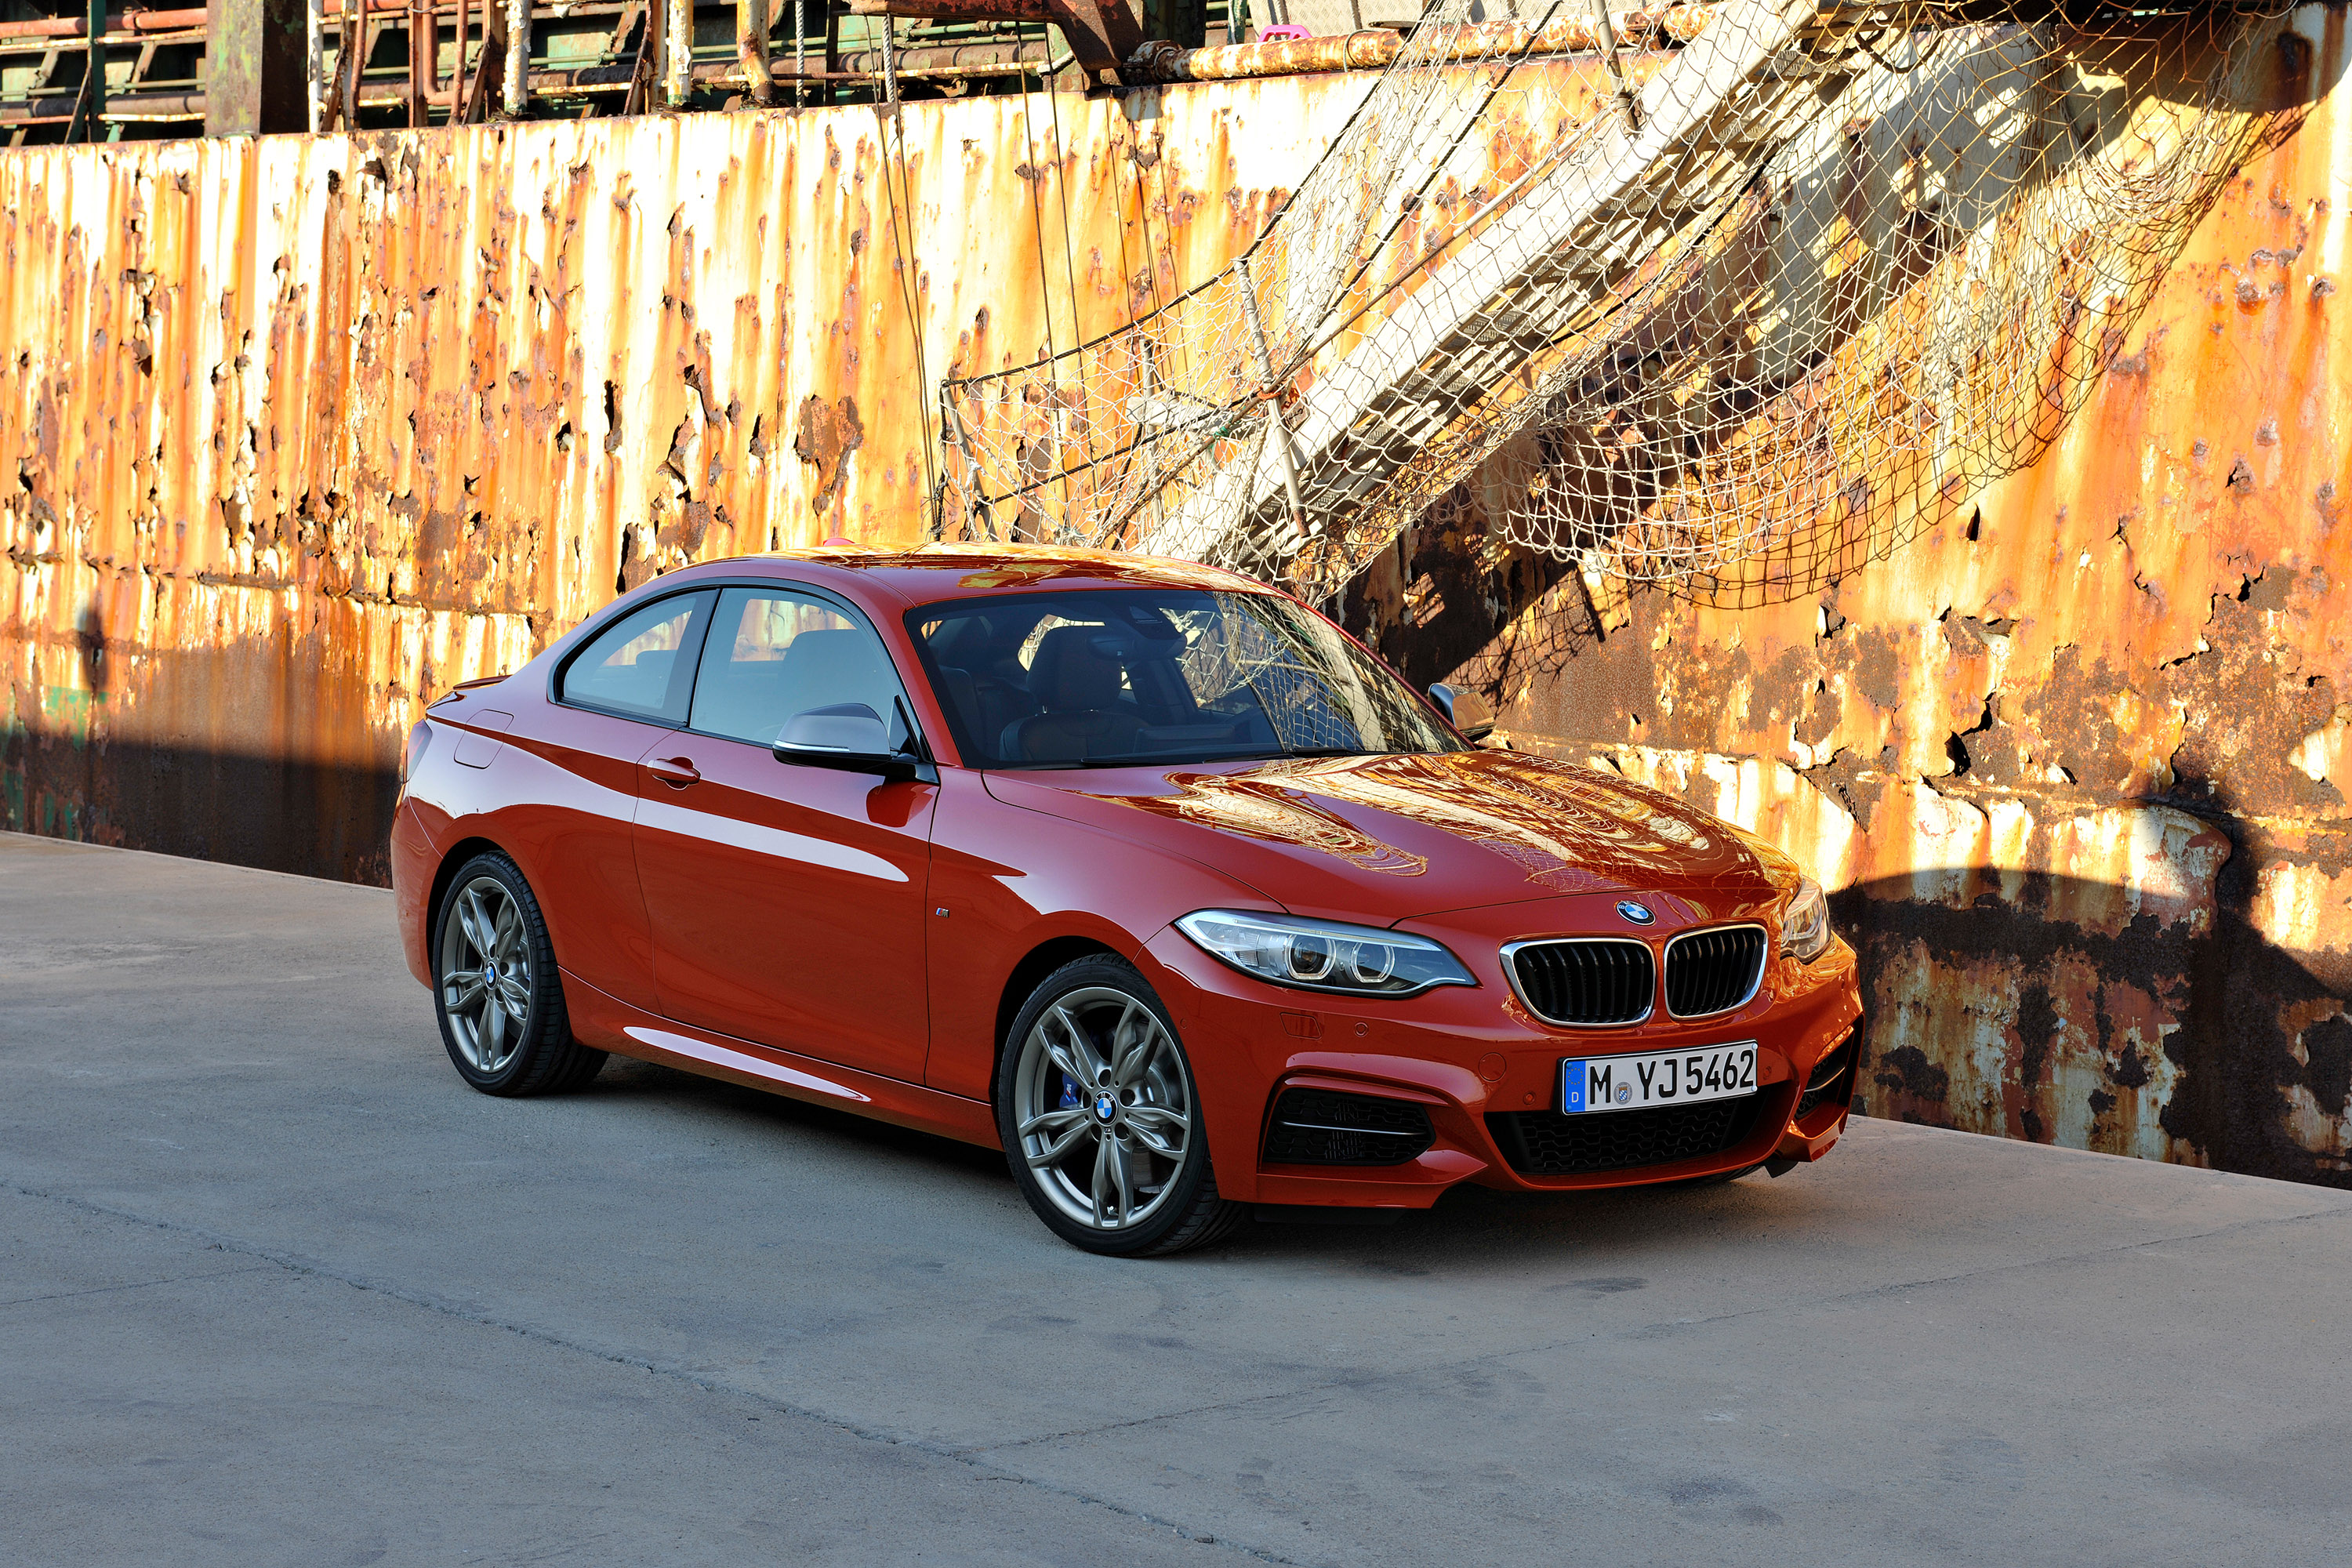 2014 BMW 2 Series Coupe - HD Pictures @ carsinvasion.com